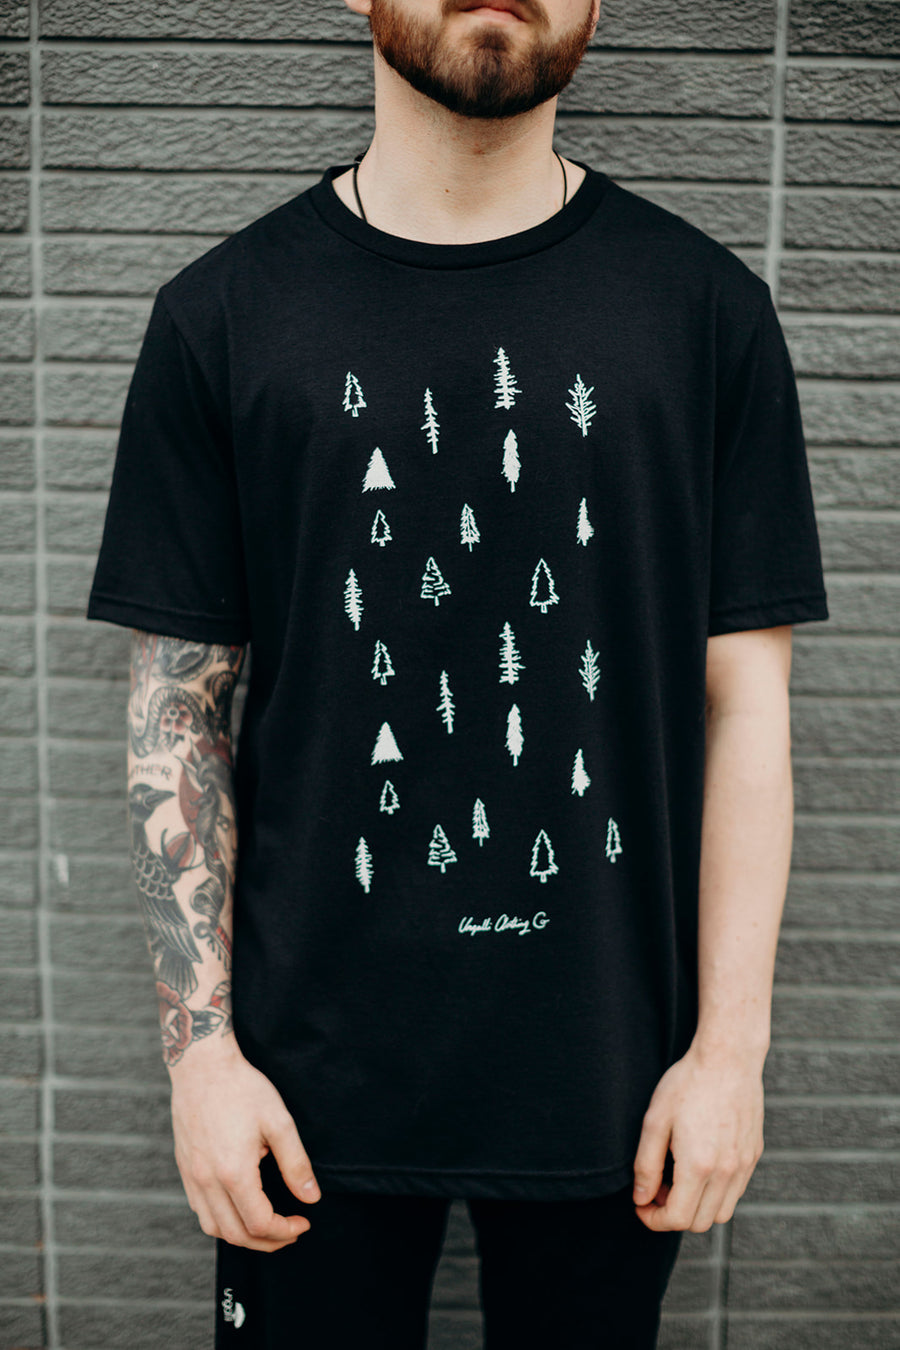 Unisex black organically made t-shirt with white tree design across front